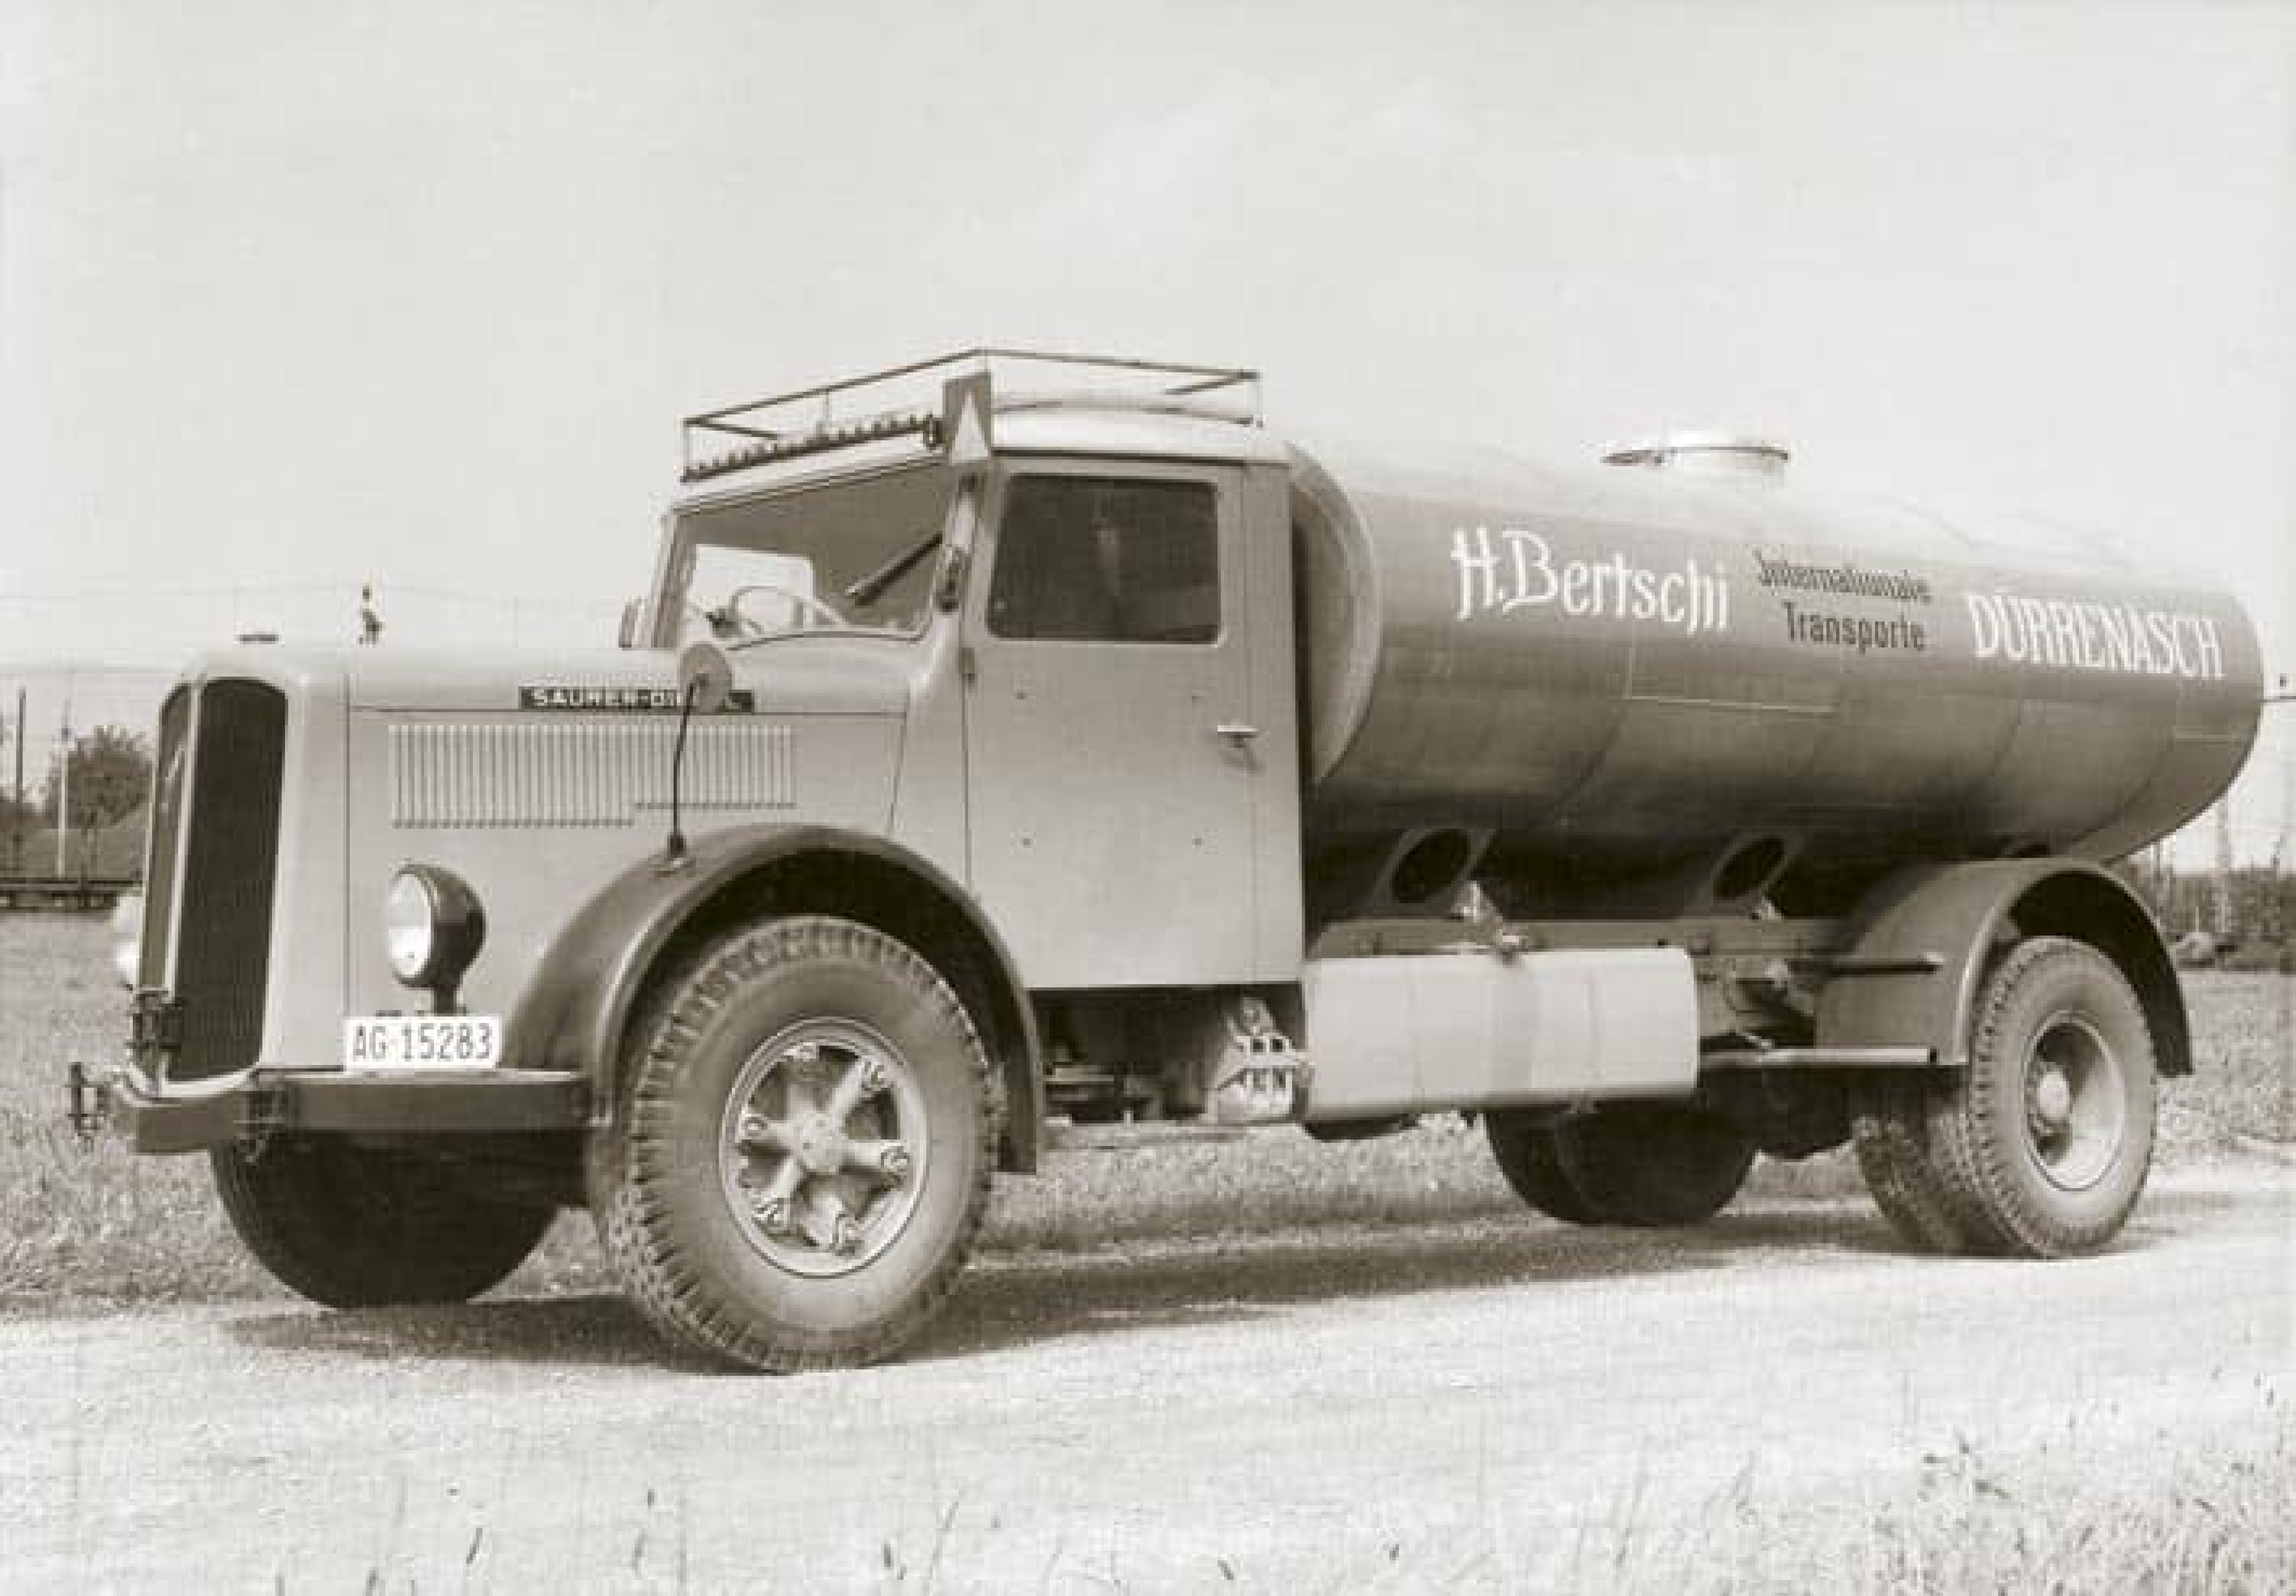 The first Bertschi road tanker truck, a Saurer model, in black and white.